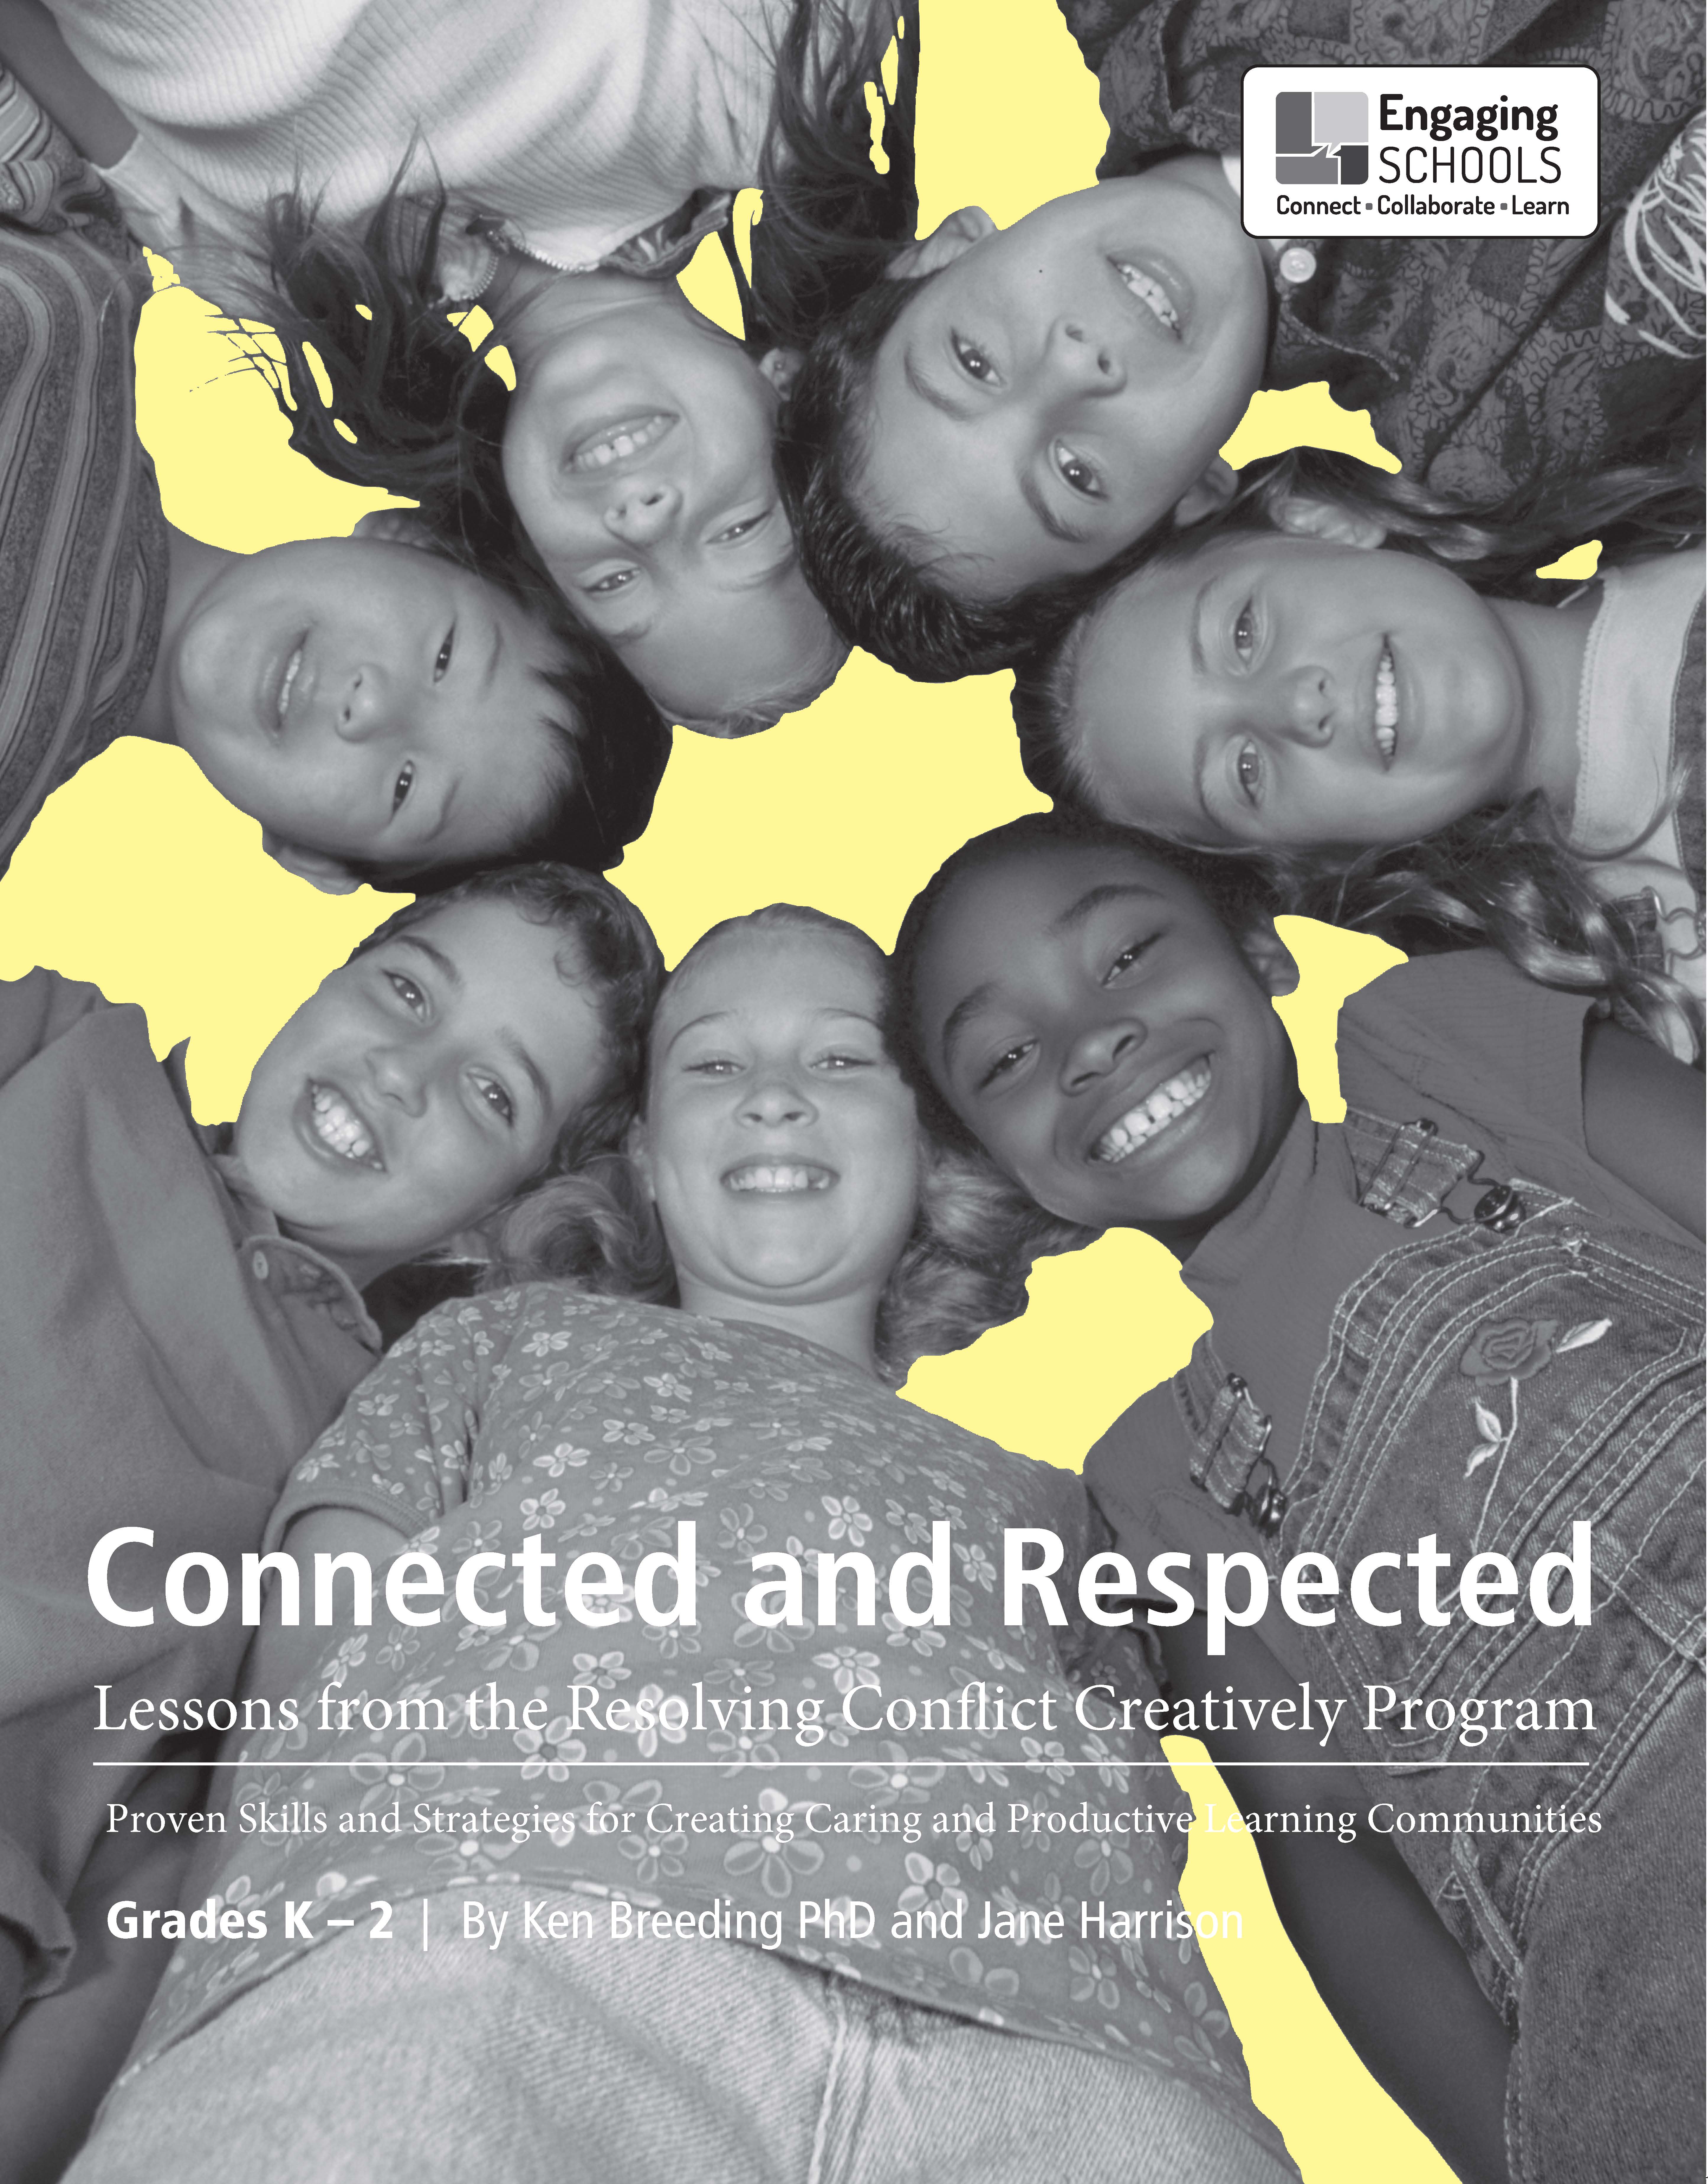 Connected and Respected (Volume 1): Lessons from the Resolving Conflict Creatively Program, Grades K-2 (CONRE1)